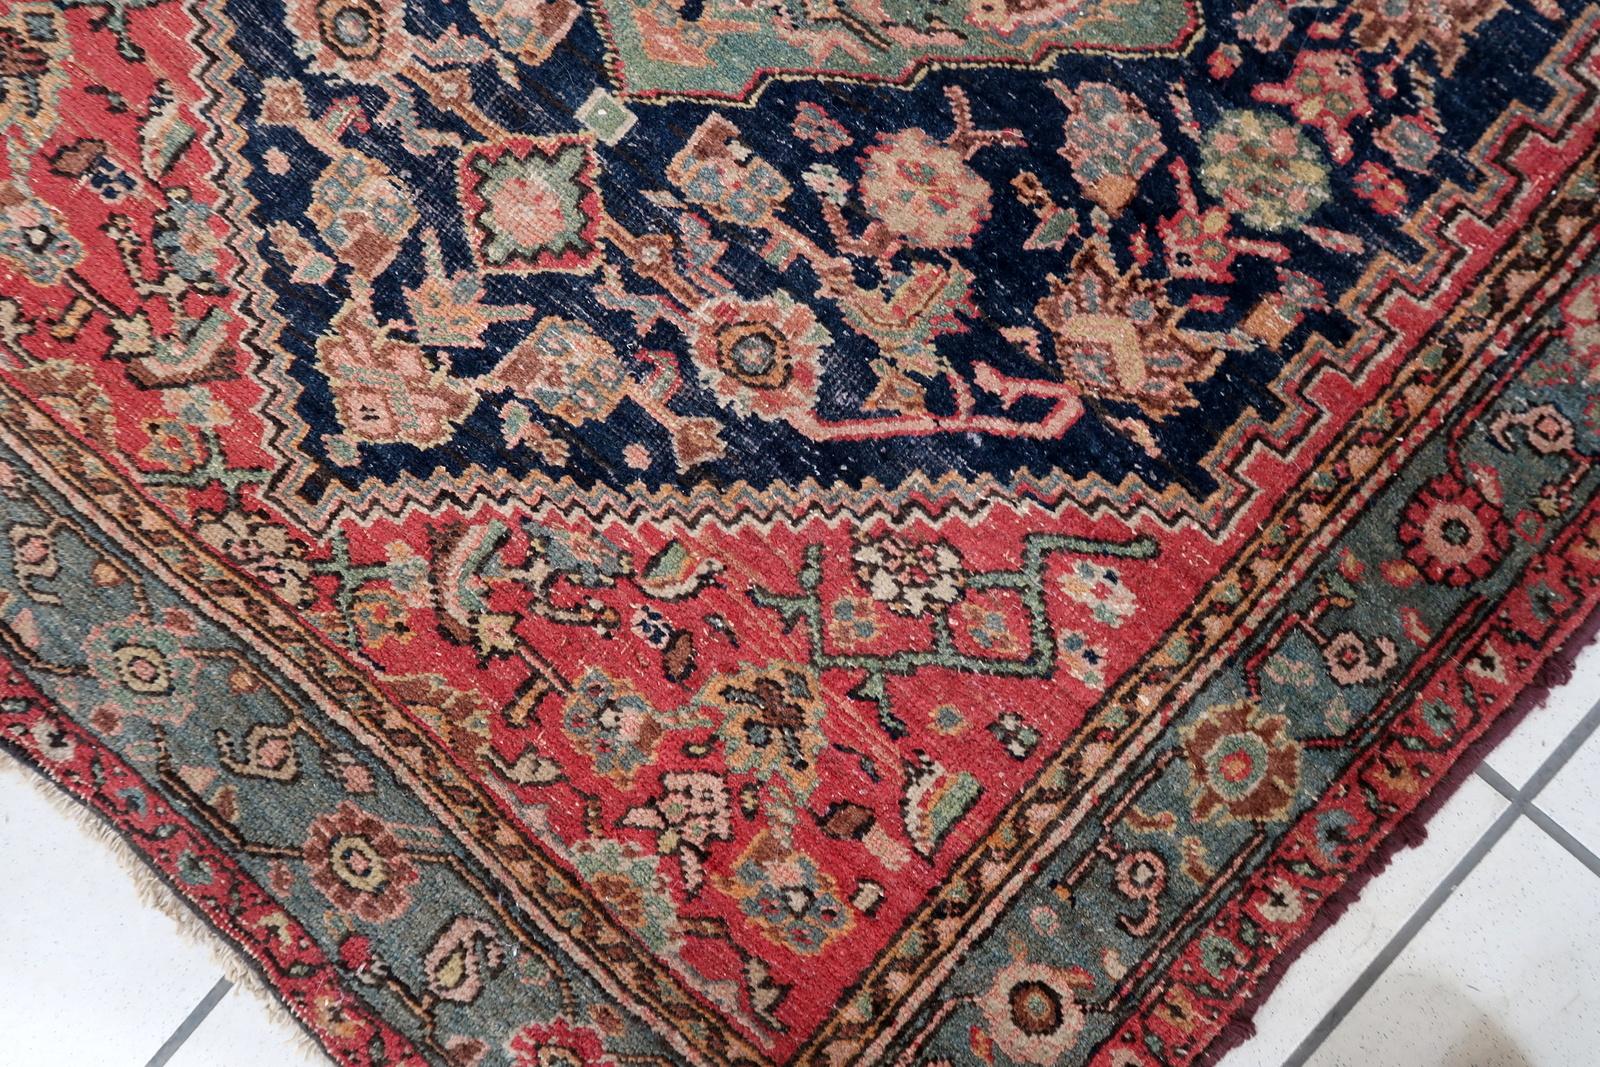 Early 20th Century Handmade Antique Persian Farahan Rug 3.3' x 4.6', 1910s, 1C1089 For Sale